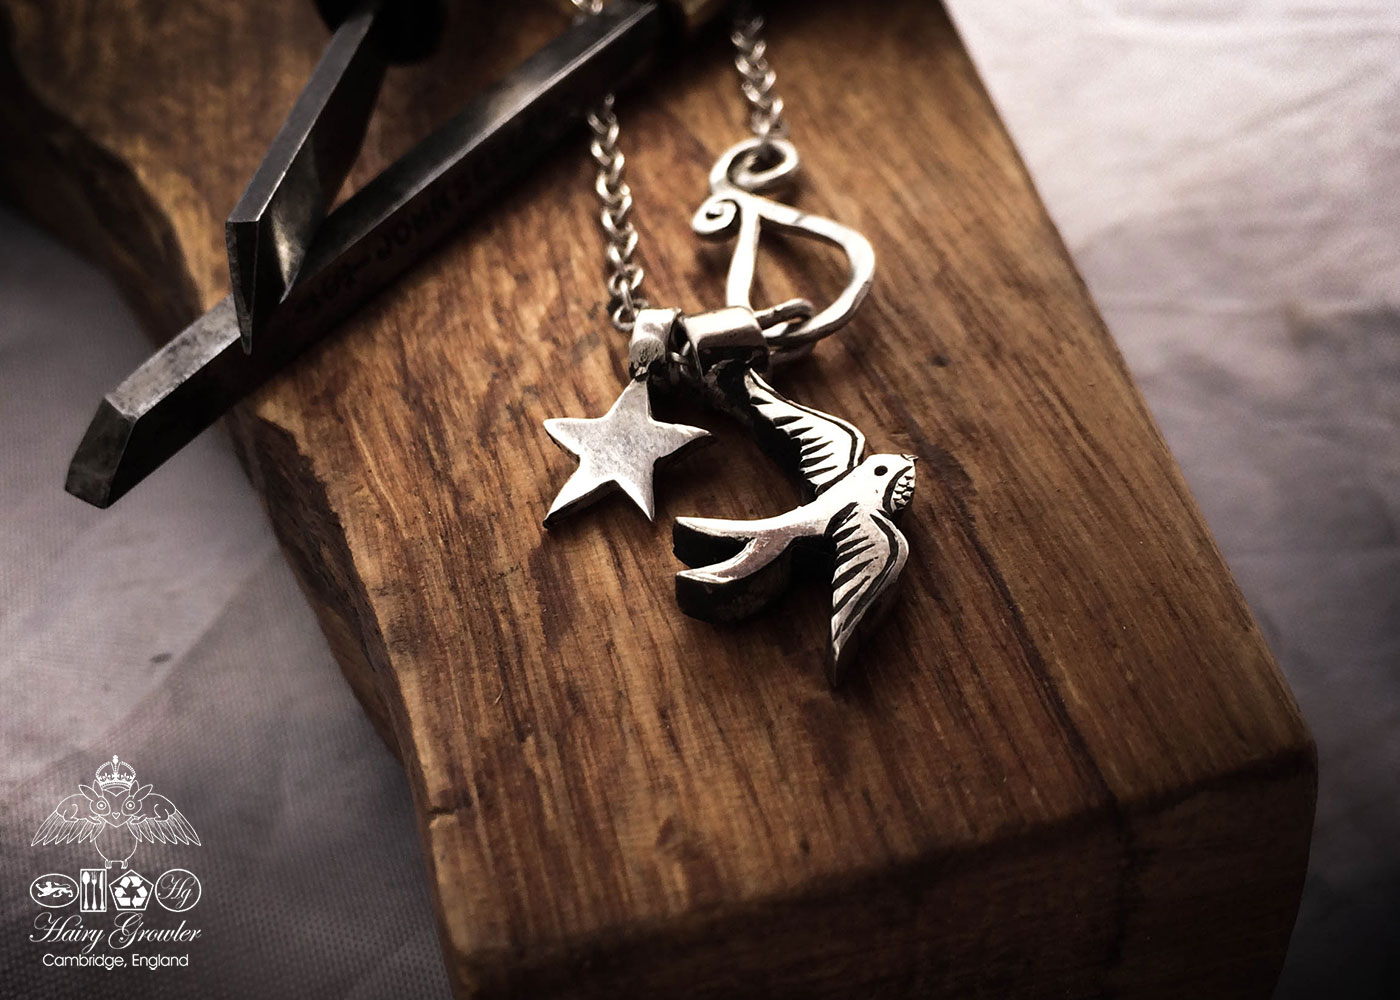 handcrafted silver swallow charm for a tree sculpture, necklace or bracelet